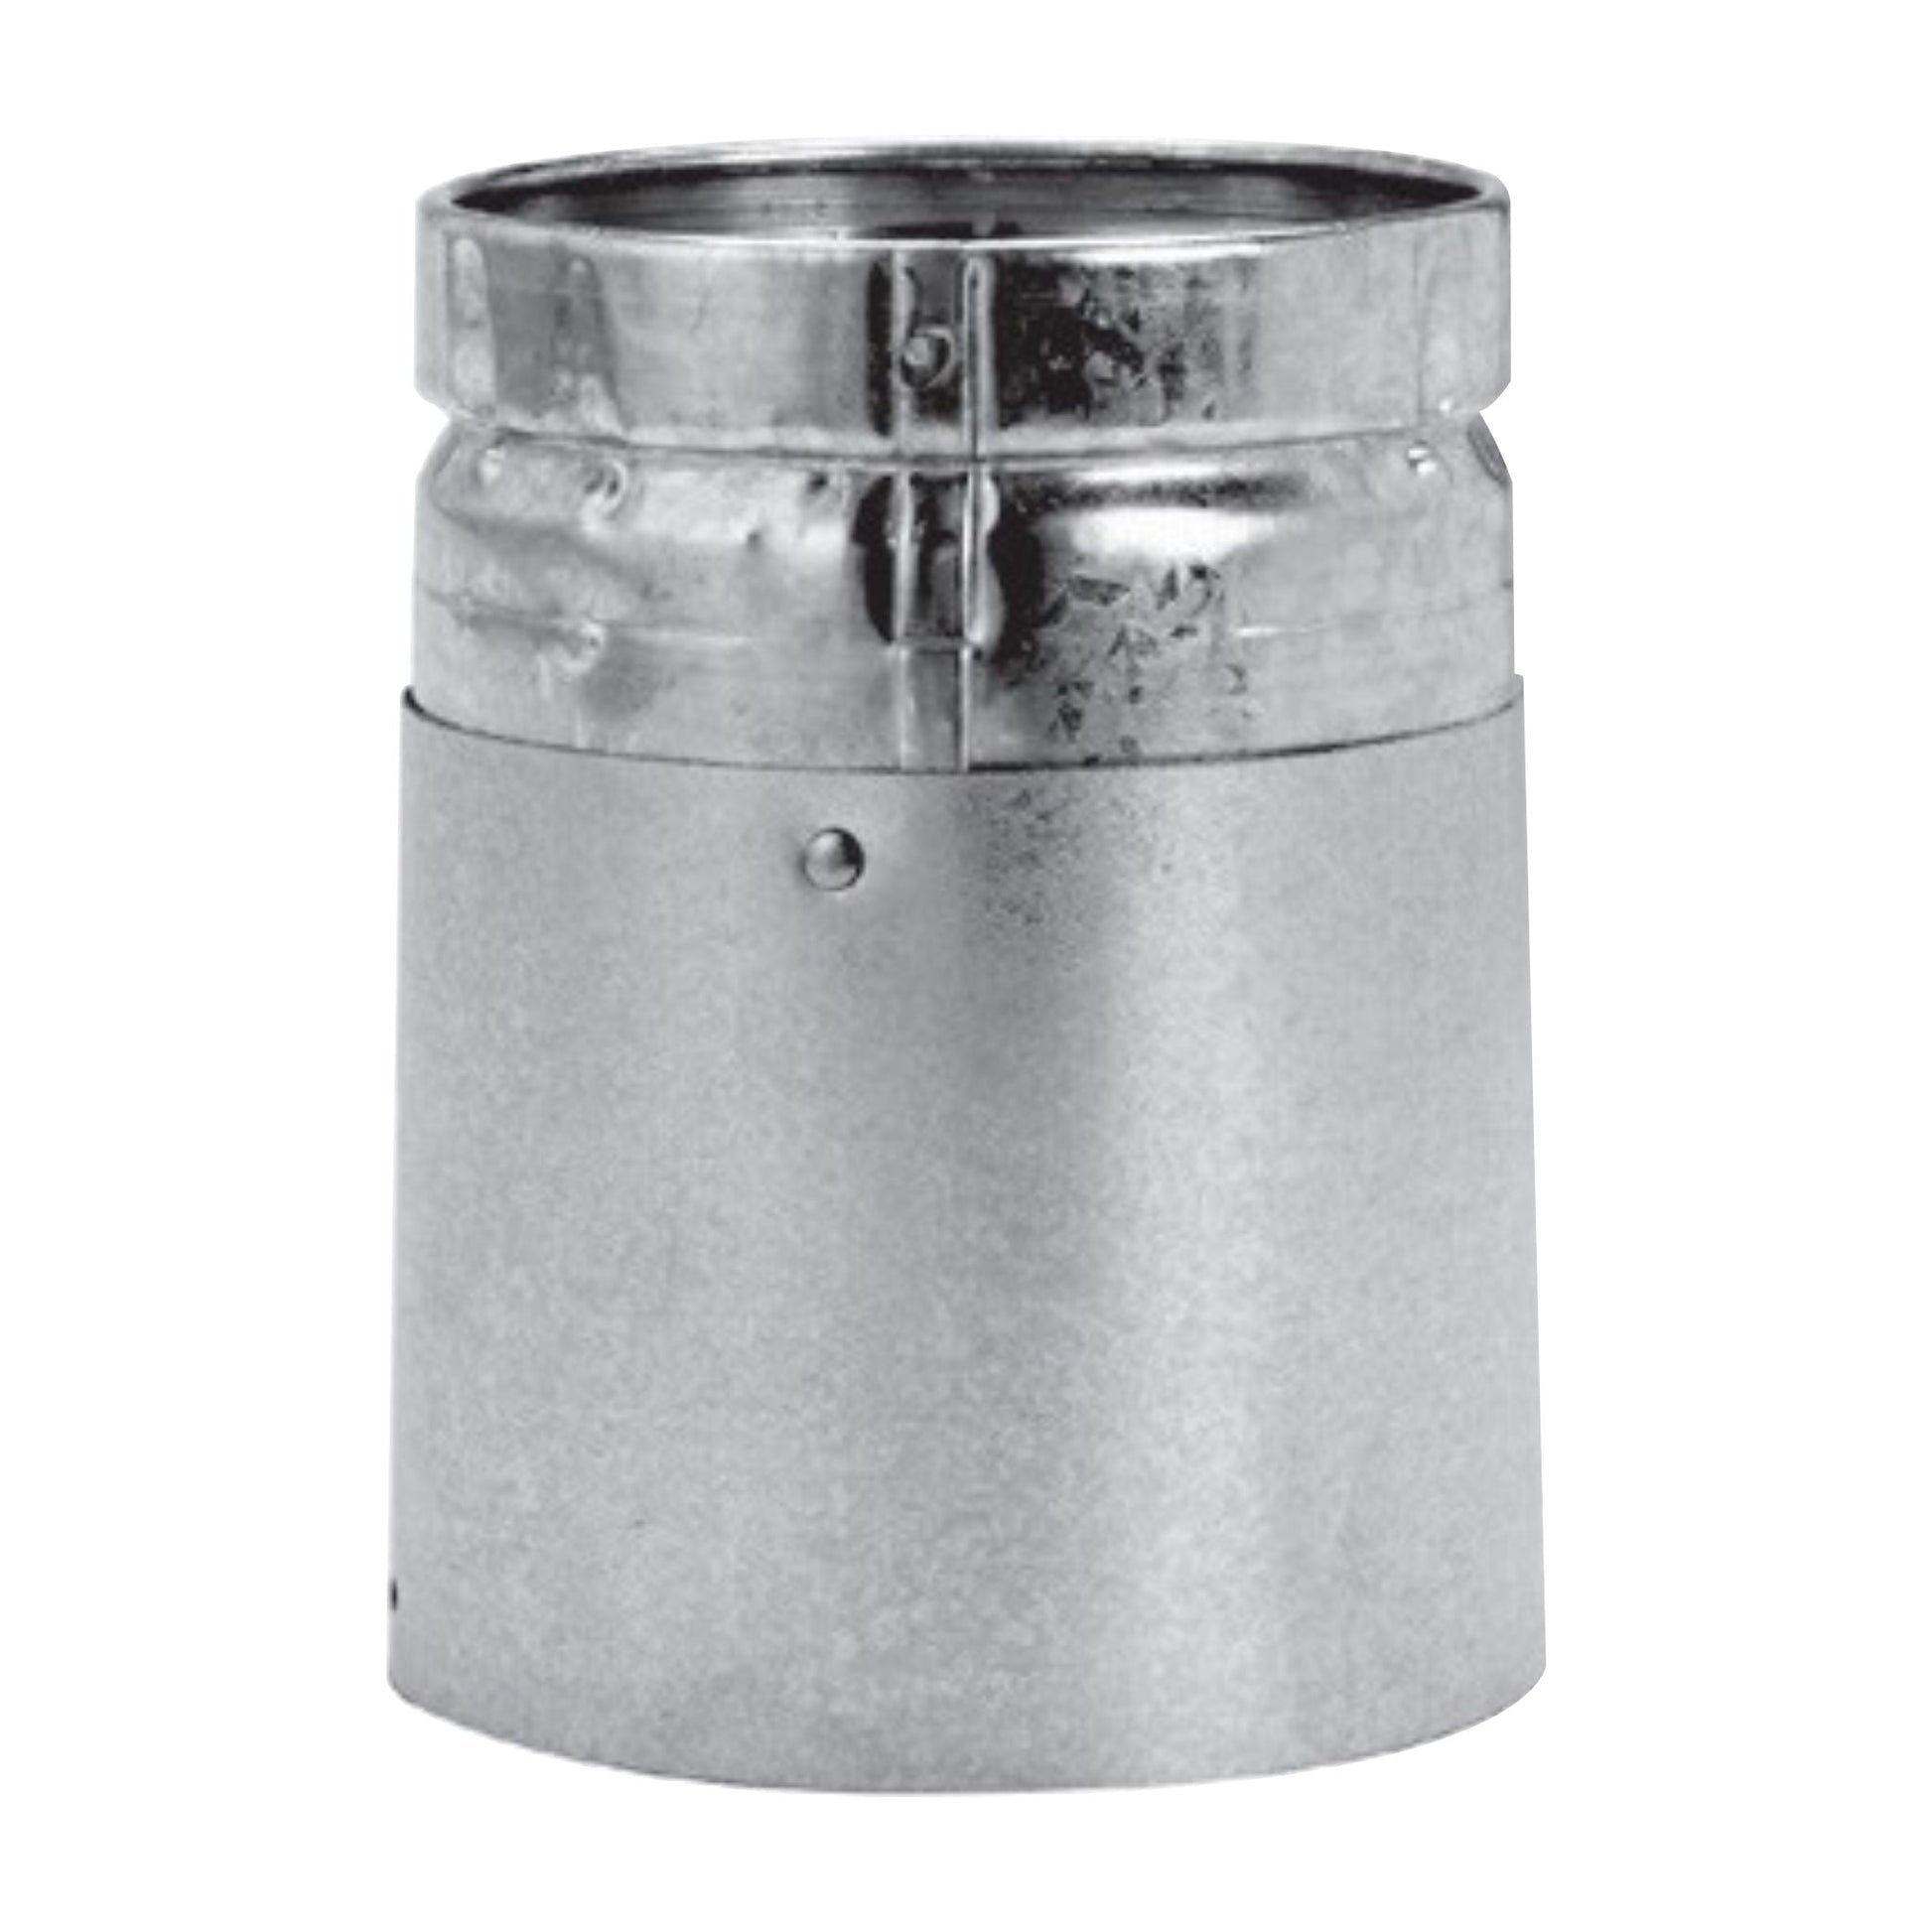 DuraVent Round Type B Gas Vent Model BV 10" Universal Male Adapter